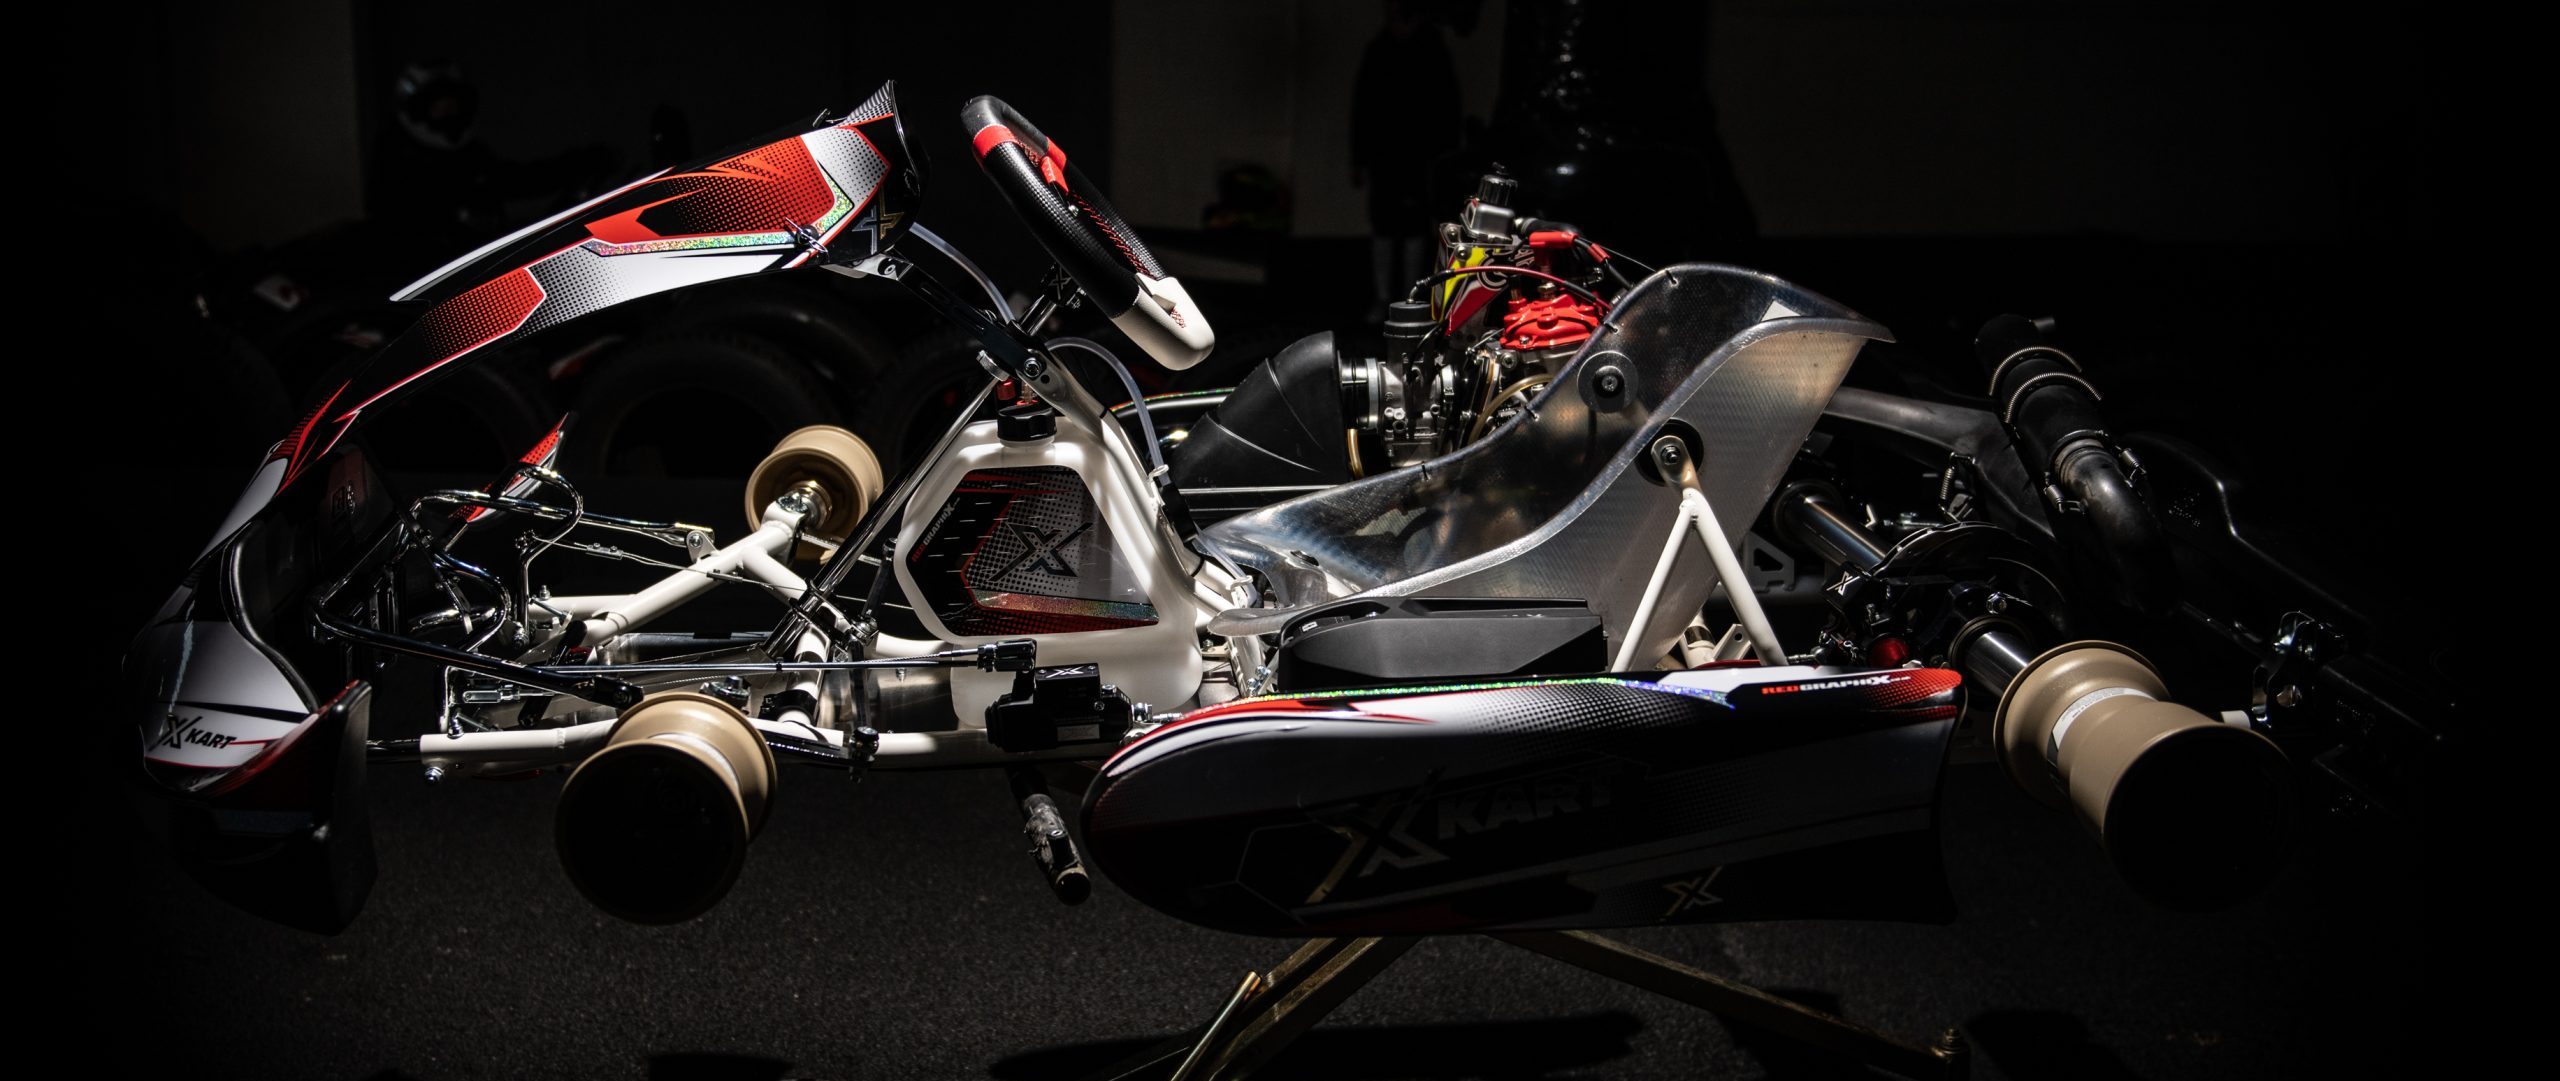 image of XKART chassis or TB KART from italy, white chassis with striking red and black livery of xkart team side view with magnesium kart wheels